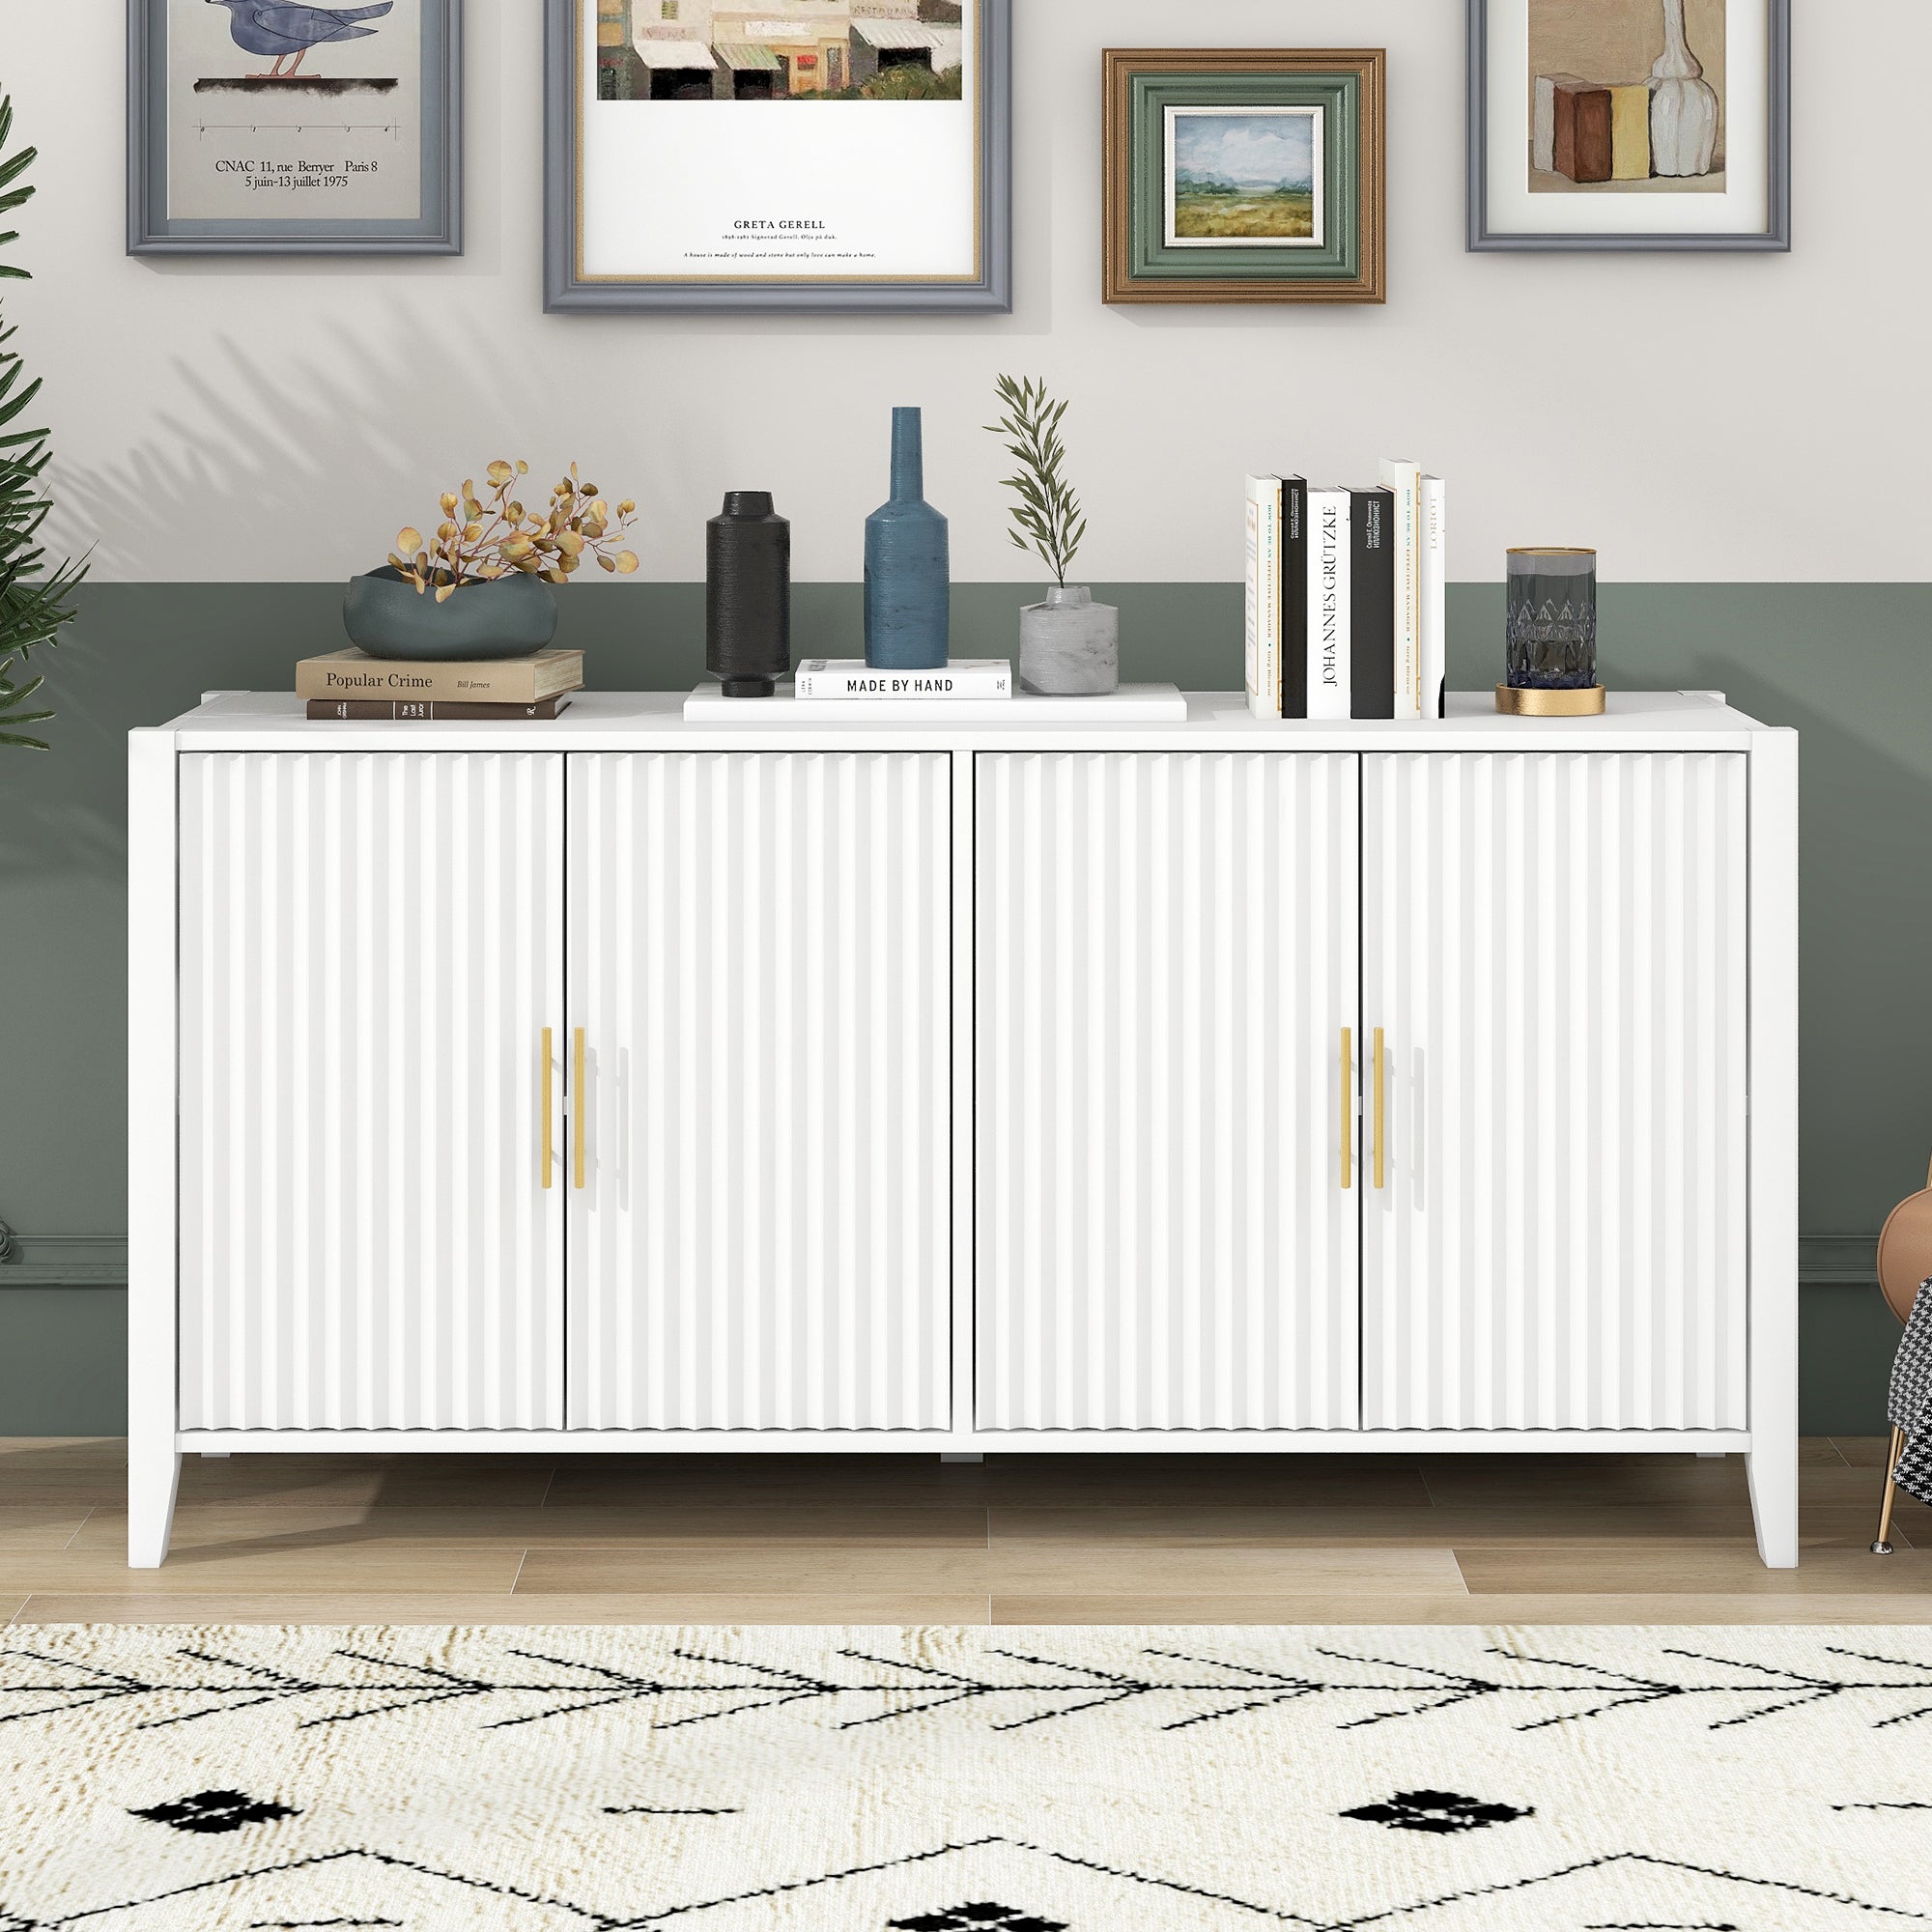 U Style Accent Storage Cabinet Sideboard Wooden white-solid wood+mdf